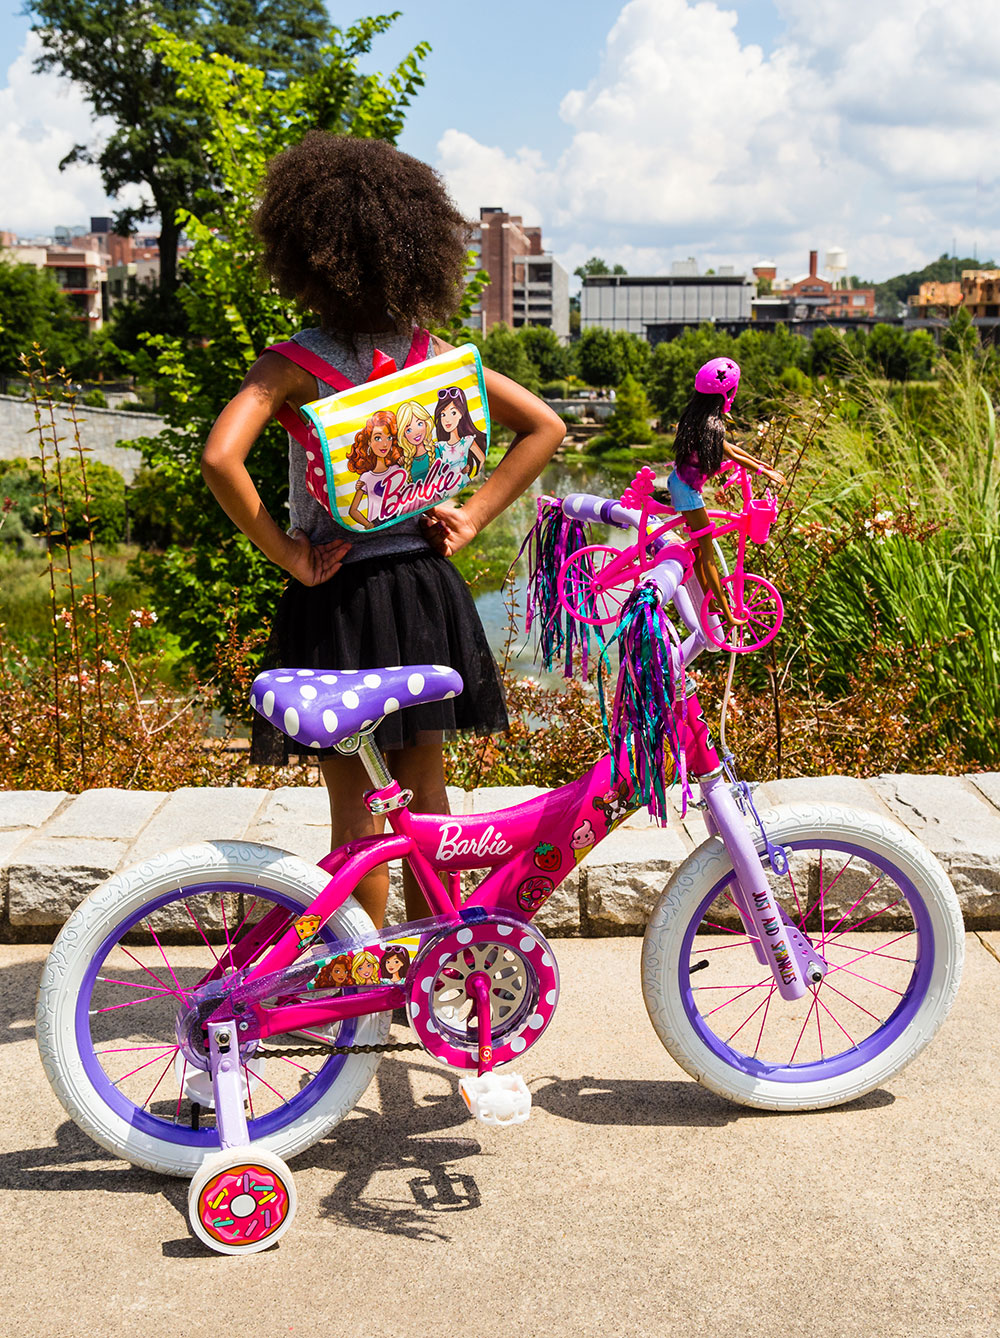 barbie bicycle 20 inch